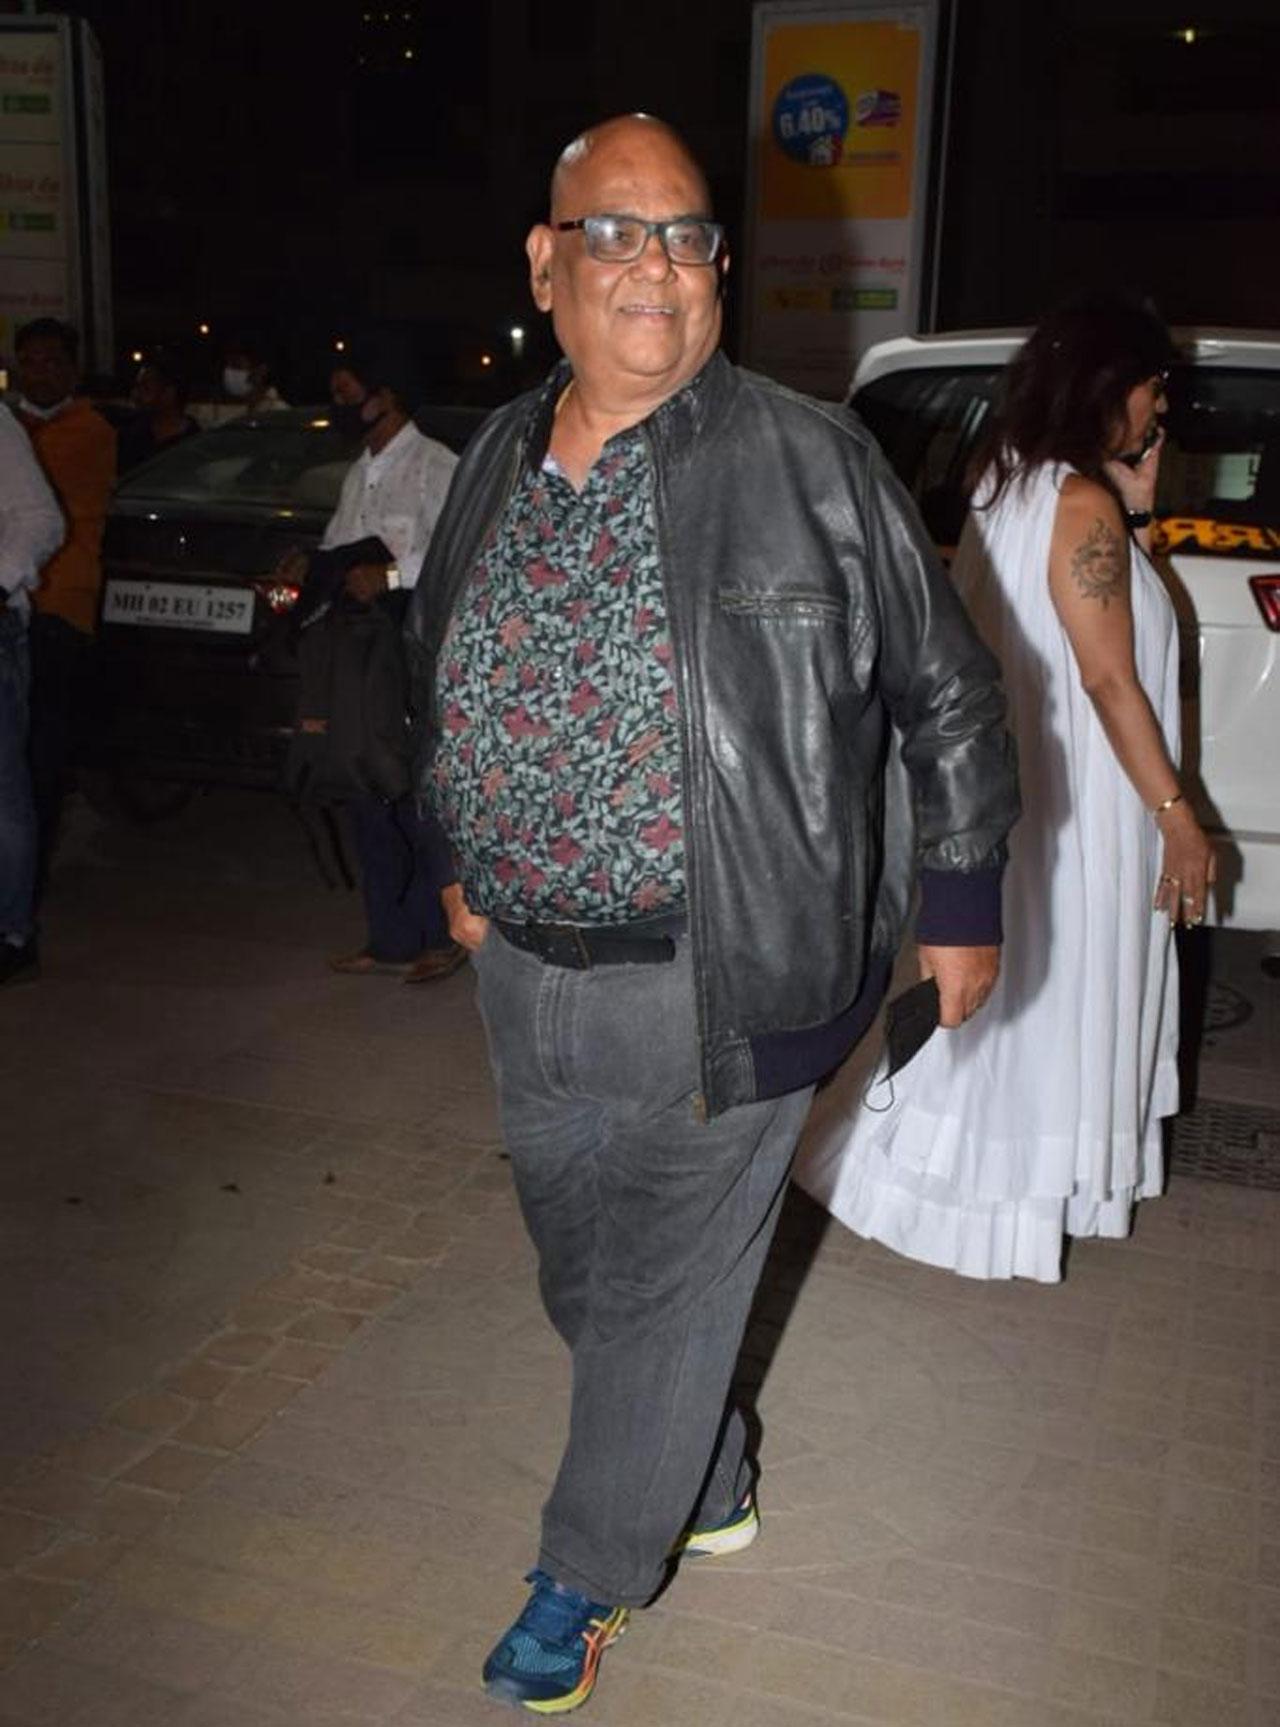 Veteran actor and director Satish Kaushik also arrived at the screening and was all smiles. Speaking to mid-day.com about how the popular number Dholida was shot Kruti says, “It’s been tremendously spiritually satisfying. We were to shoot it in January 2020 but it got postponed due to Covid-19 restrictions. I finally shot the song in January 2021 with Sanjay sir and Alia and you get to see it after a year.